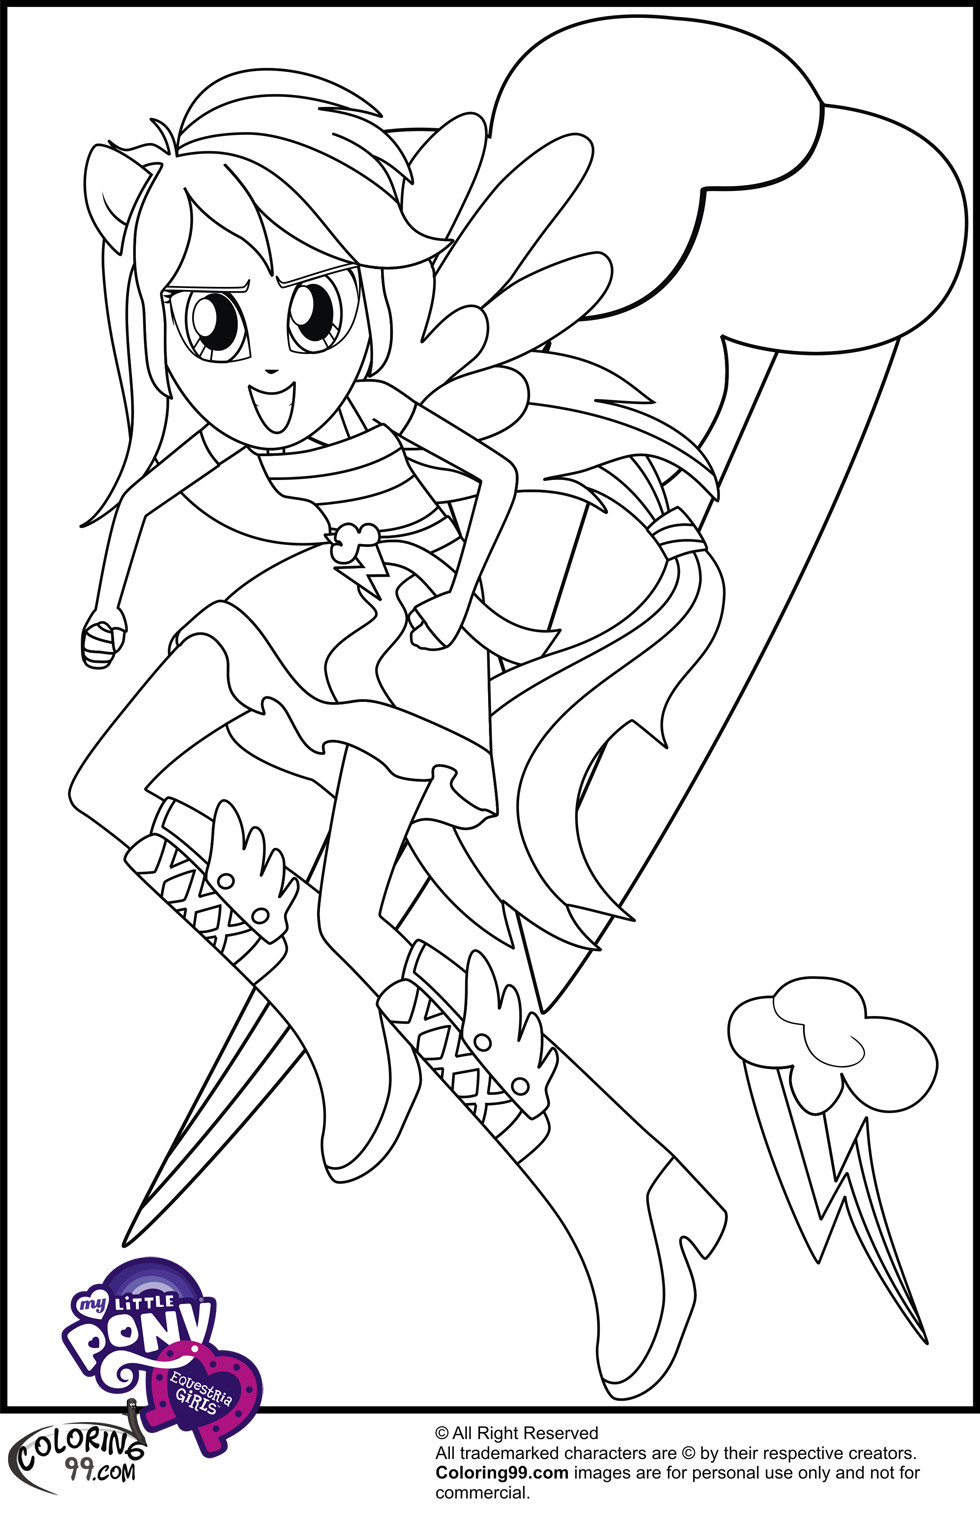 Coloring Sheets For Girls My Little Pony
 My Little Pony Equestria Girls Coloring Pages